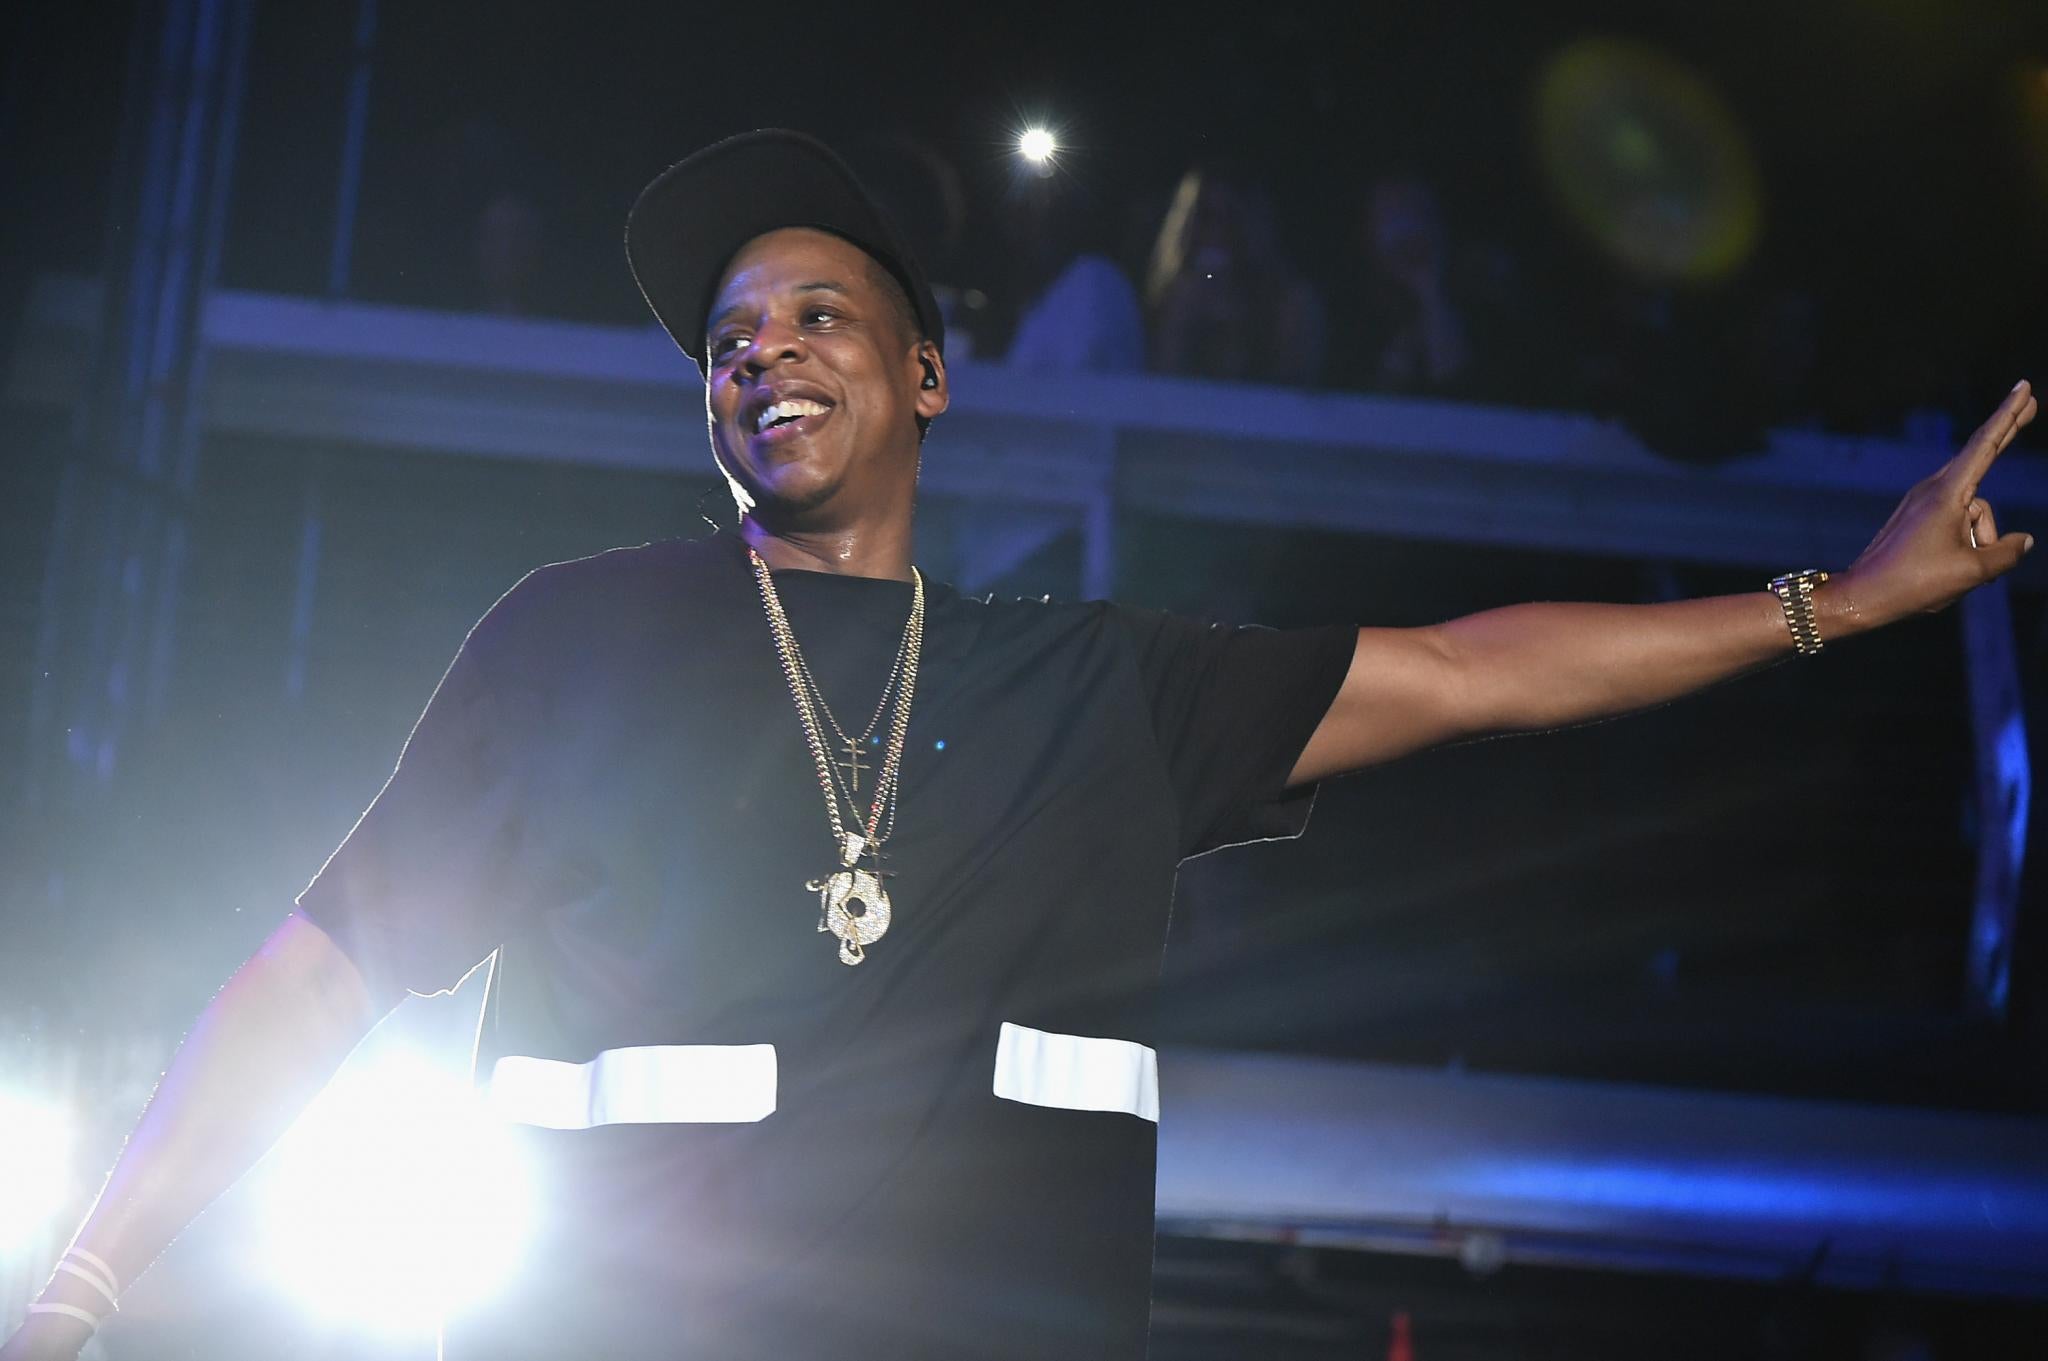 Must-See: Jay-Z Spotted Stanning Hard for Beyoncé During Made in America Festival
